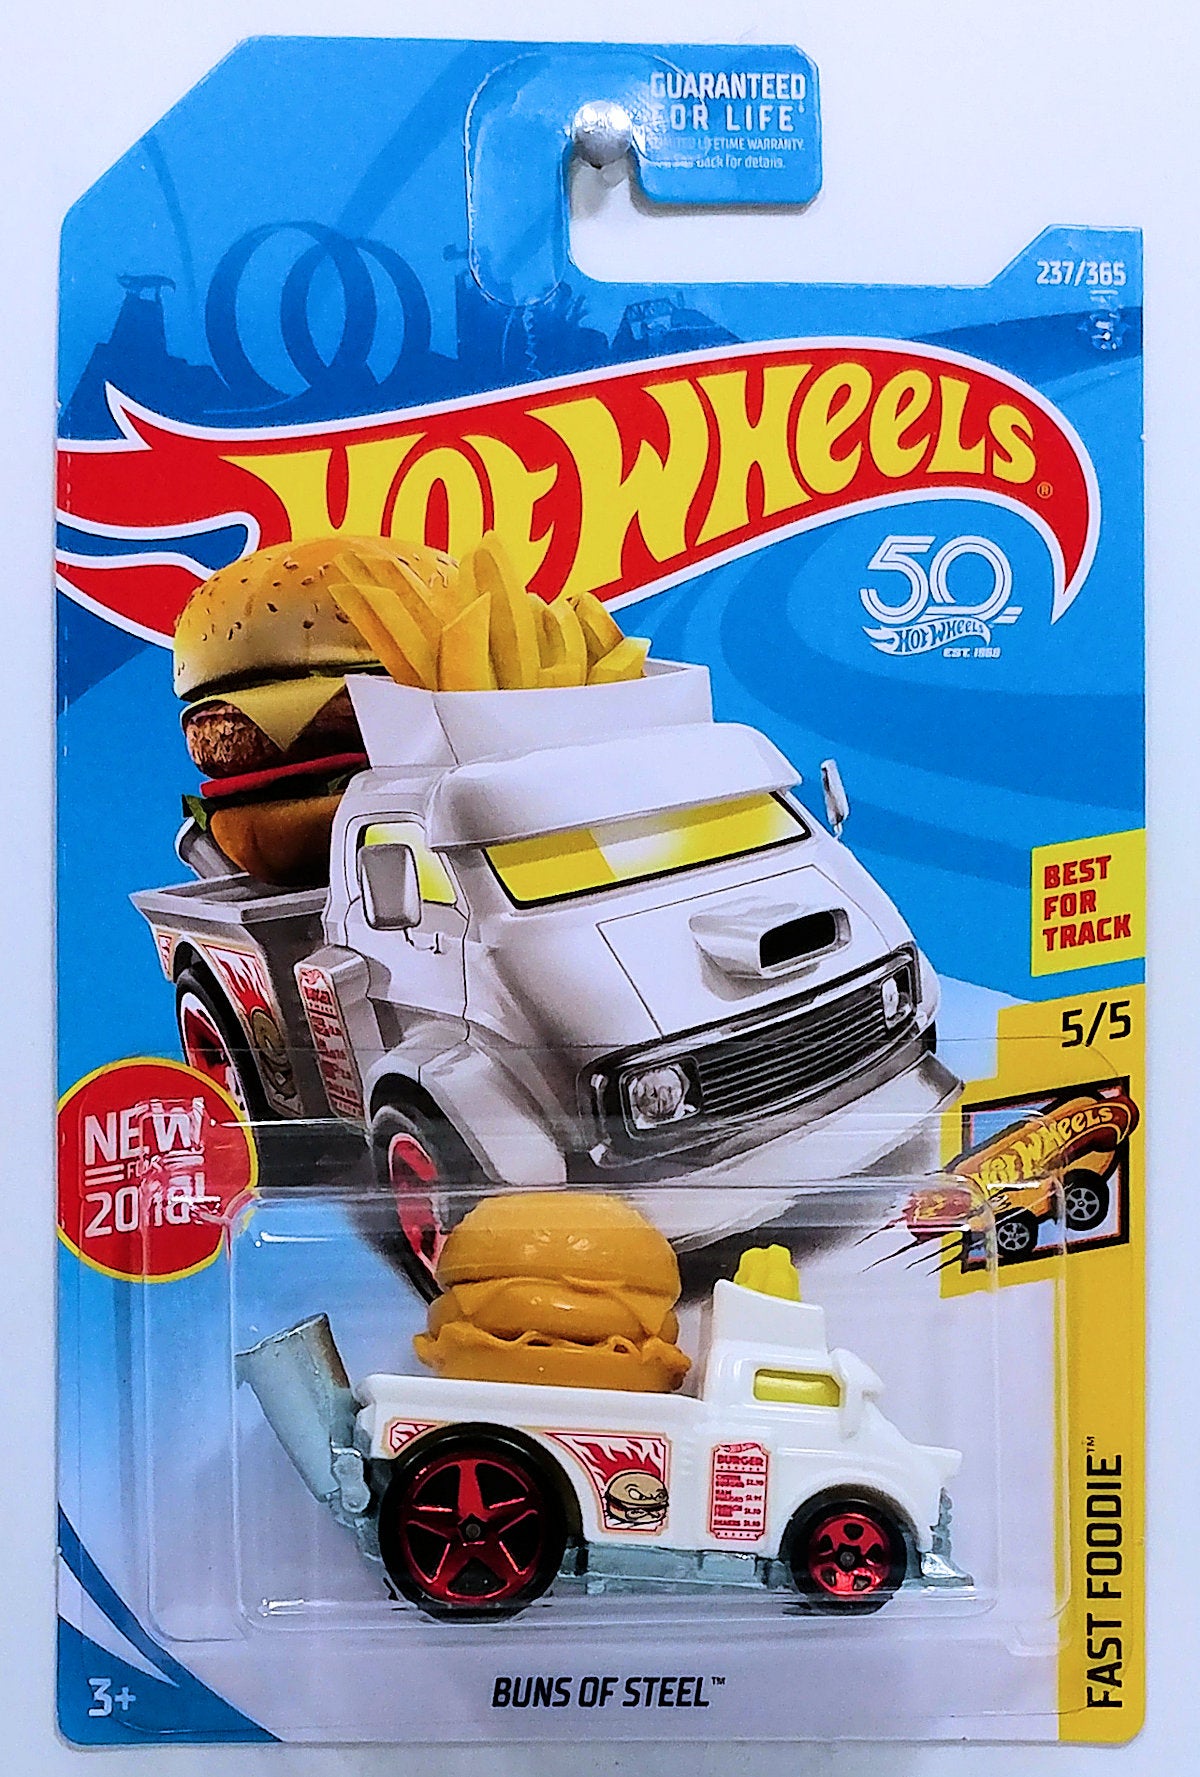 Hot Wheels 2018 - Collector # 237/365 - Fast Foodie 5/5 - Buns of Steel - White -  50th Card